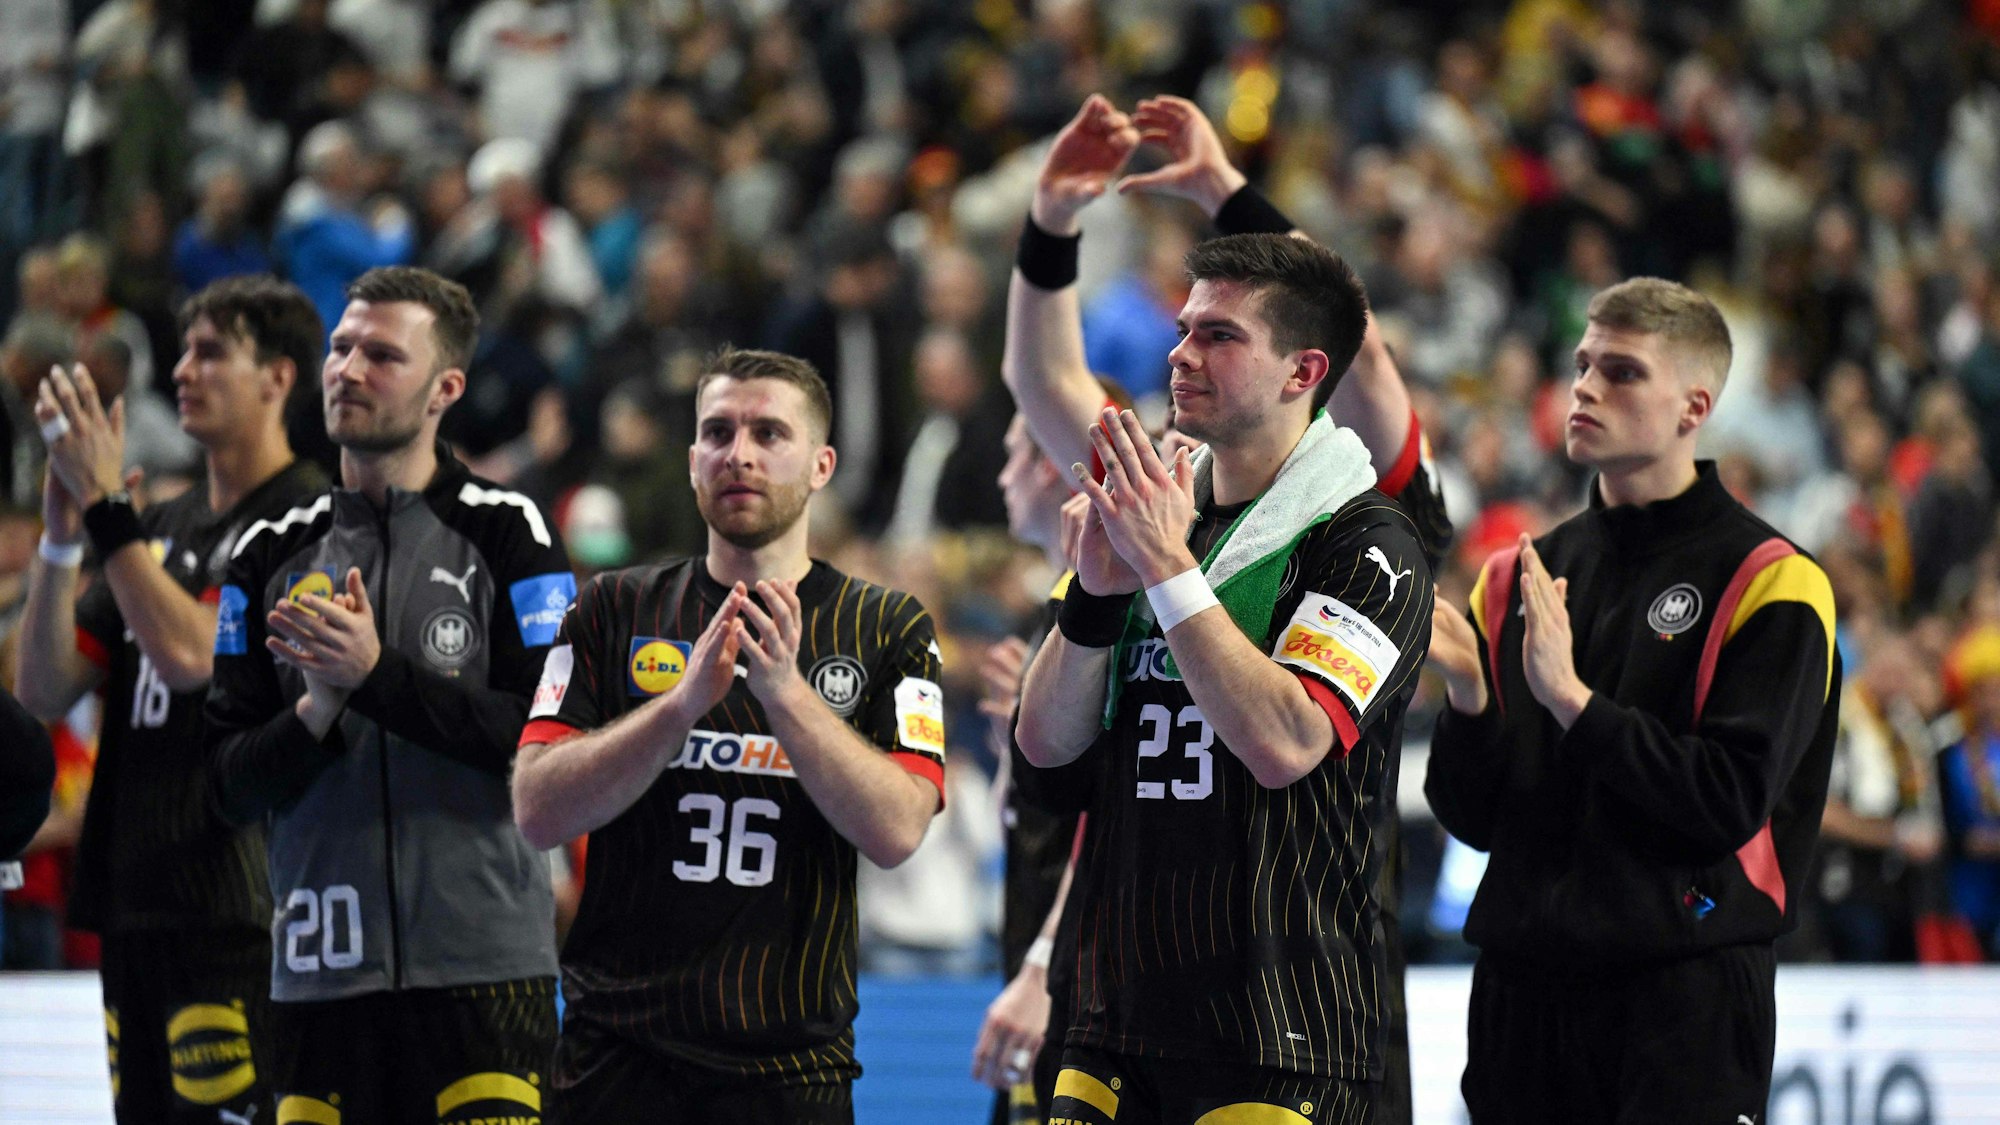 Germany's right back #23 Renars Uscins (2R) and team mates celebrate at the end of the Men's EURO 2024 EHF Handball European Championship main round match between Germany and Croatia in Cologne, western Germany on January 24, 2024. Croatia won the match 30-24. (Photo by INA FASSBENDER / AFP)